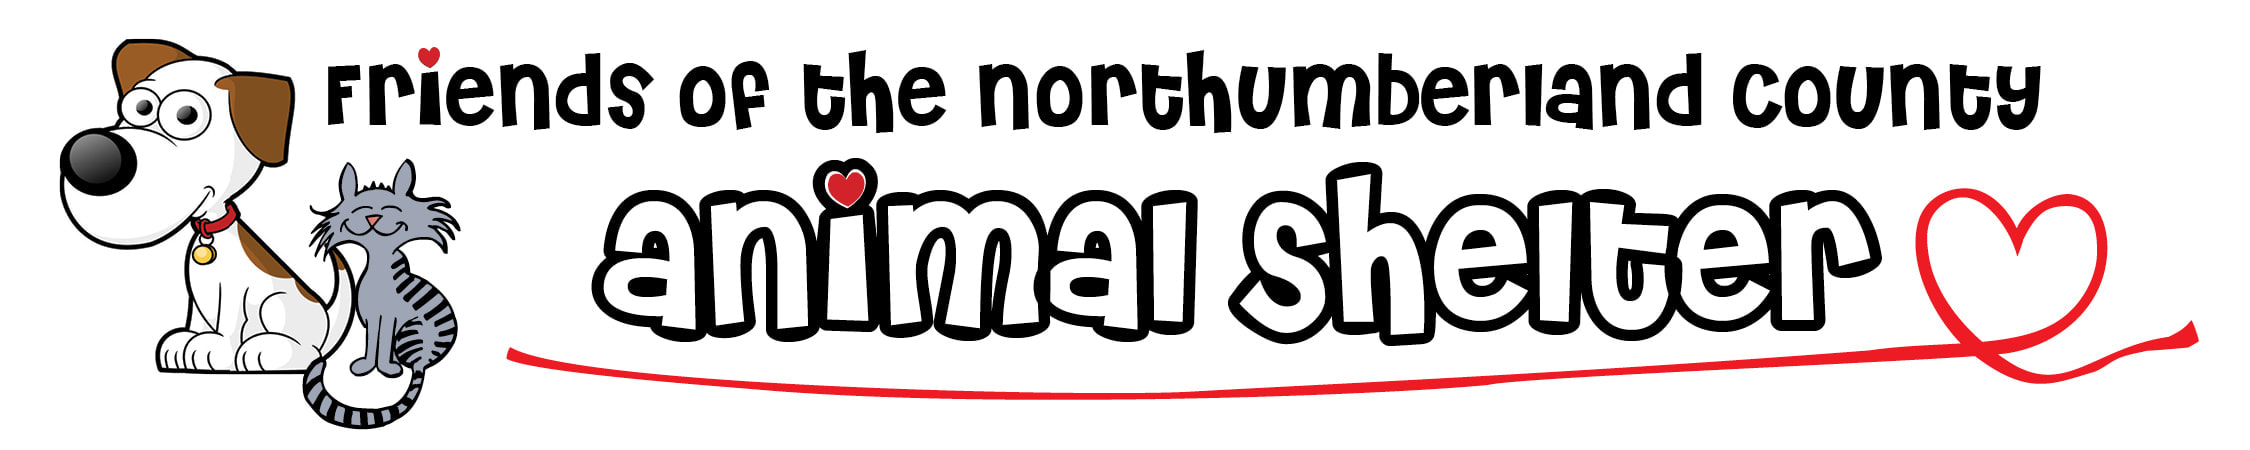 friends-of-the-northumberland-county-animal-shelter-logo